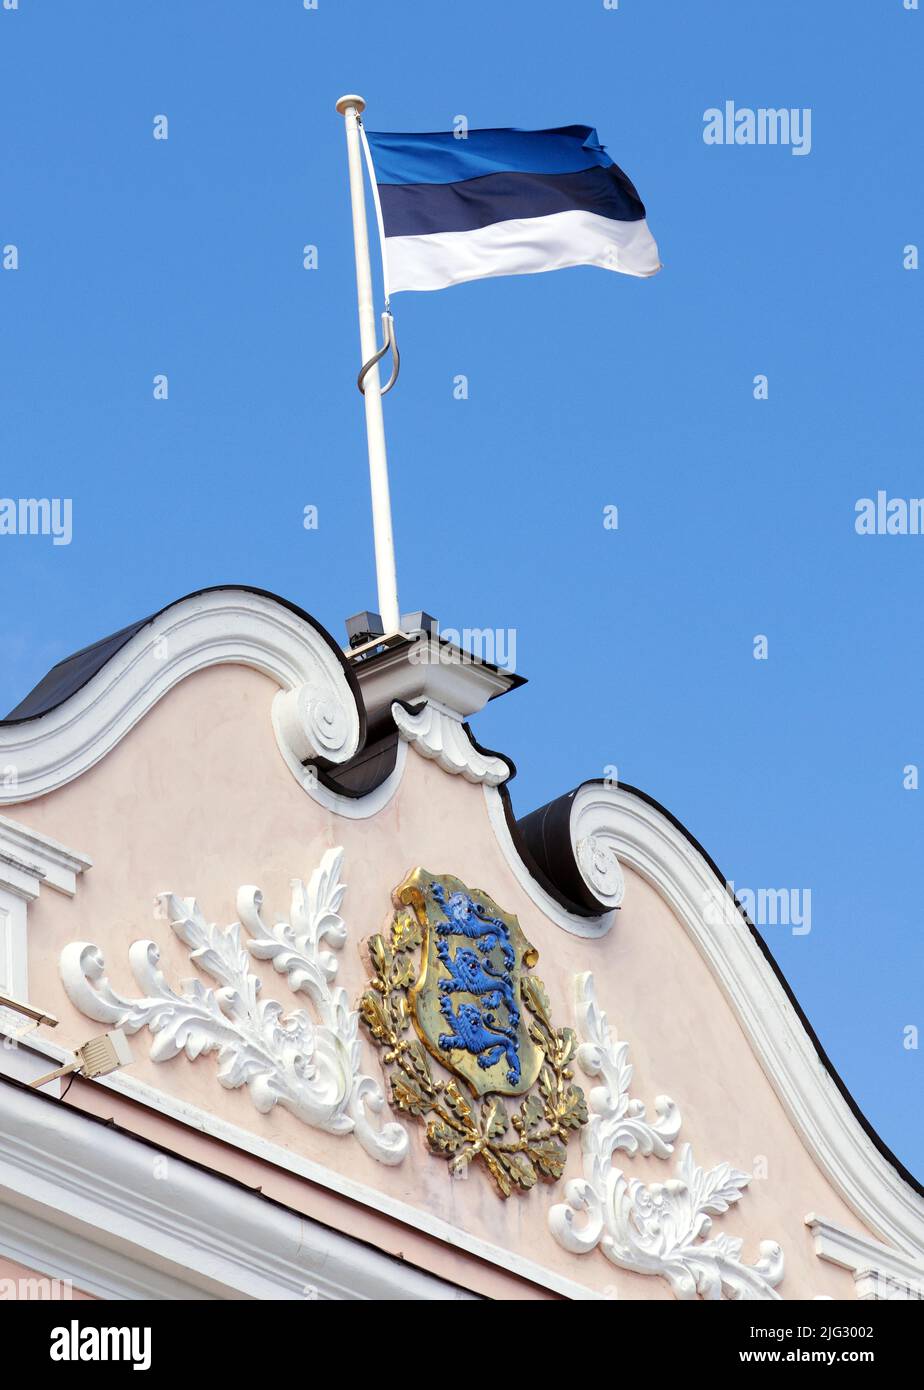 Estonia flag flying; The Estonian flag flying from the roof of the parliament building against a blue sky in Tallinn, Estonia Europe Stock Photo